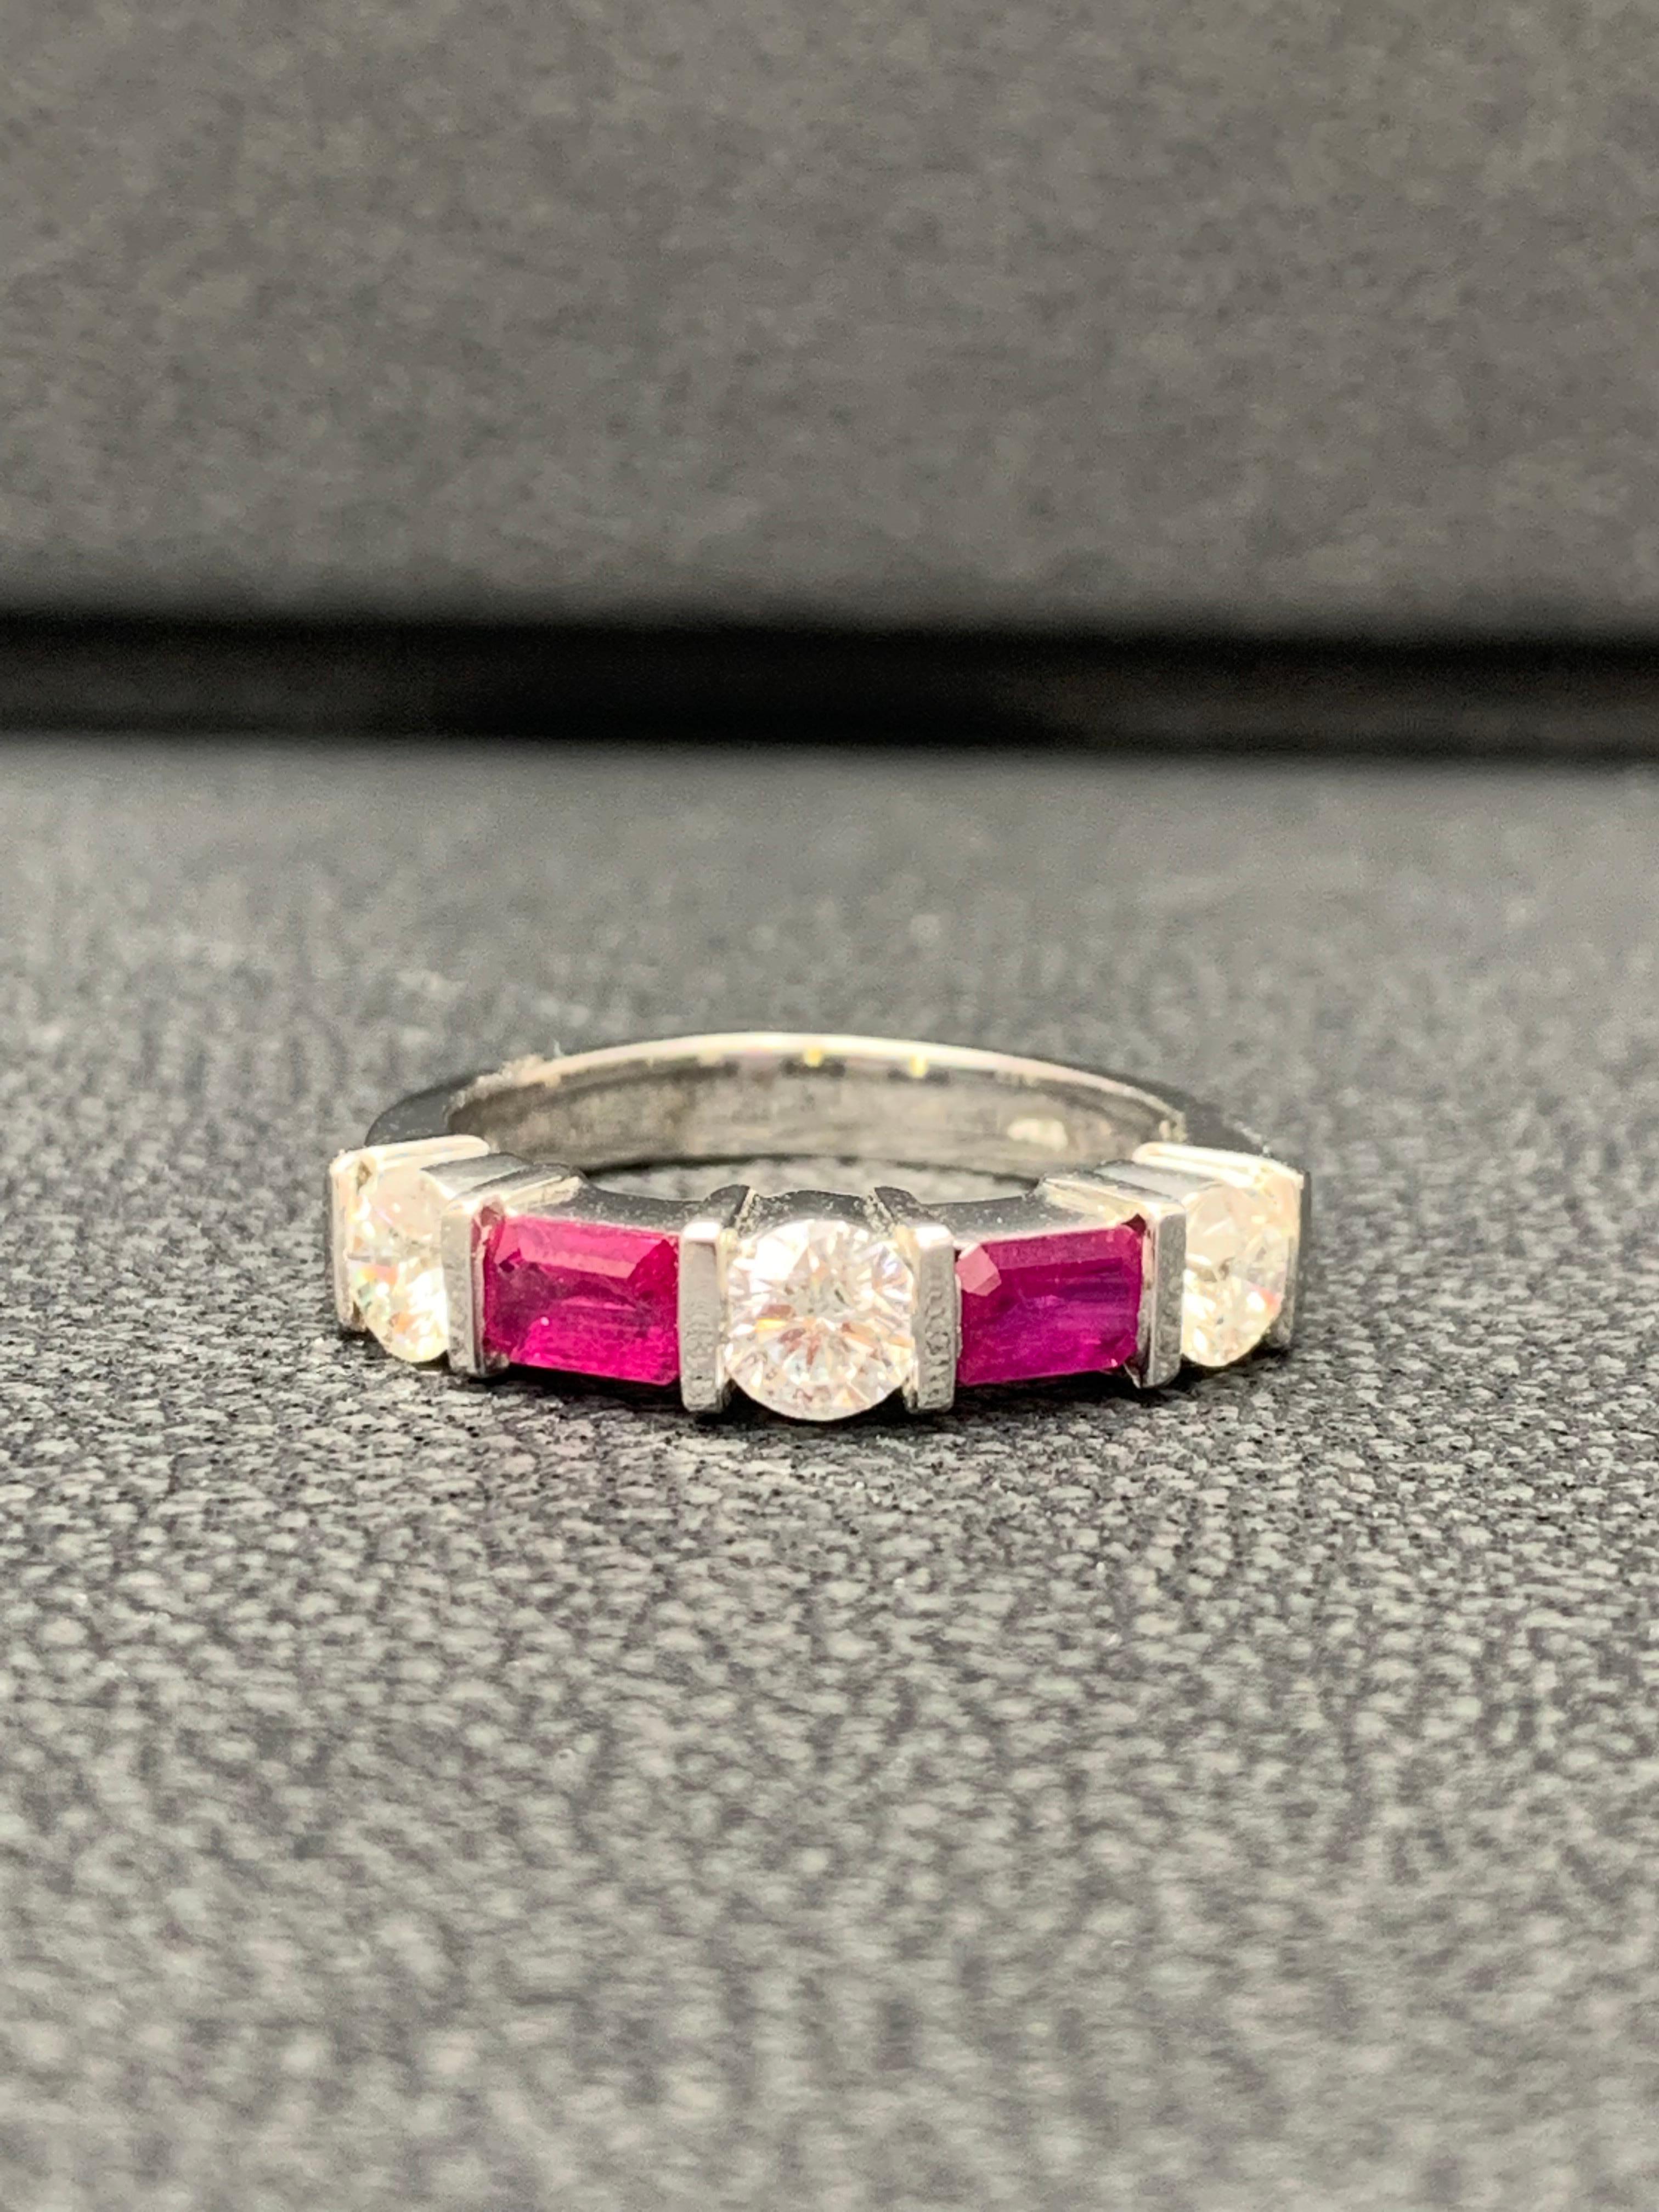 Handcrafted to perfection; showcasing color-rich emerald cut red rubies that elegantly alternate round diamonds in an 14k white gold setting. 
The 2 Rubies weigh 0.70 carats total and 3 diamonds weigh 0.75 carats total.

Size 6.5 US (Sizable). One